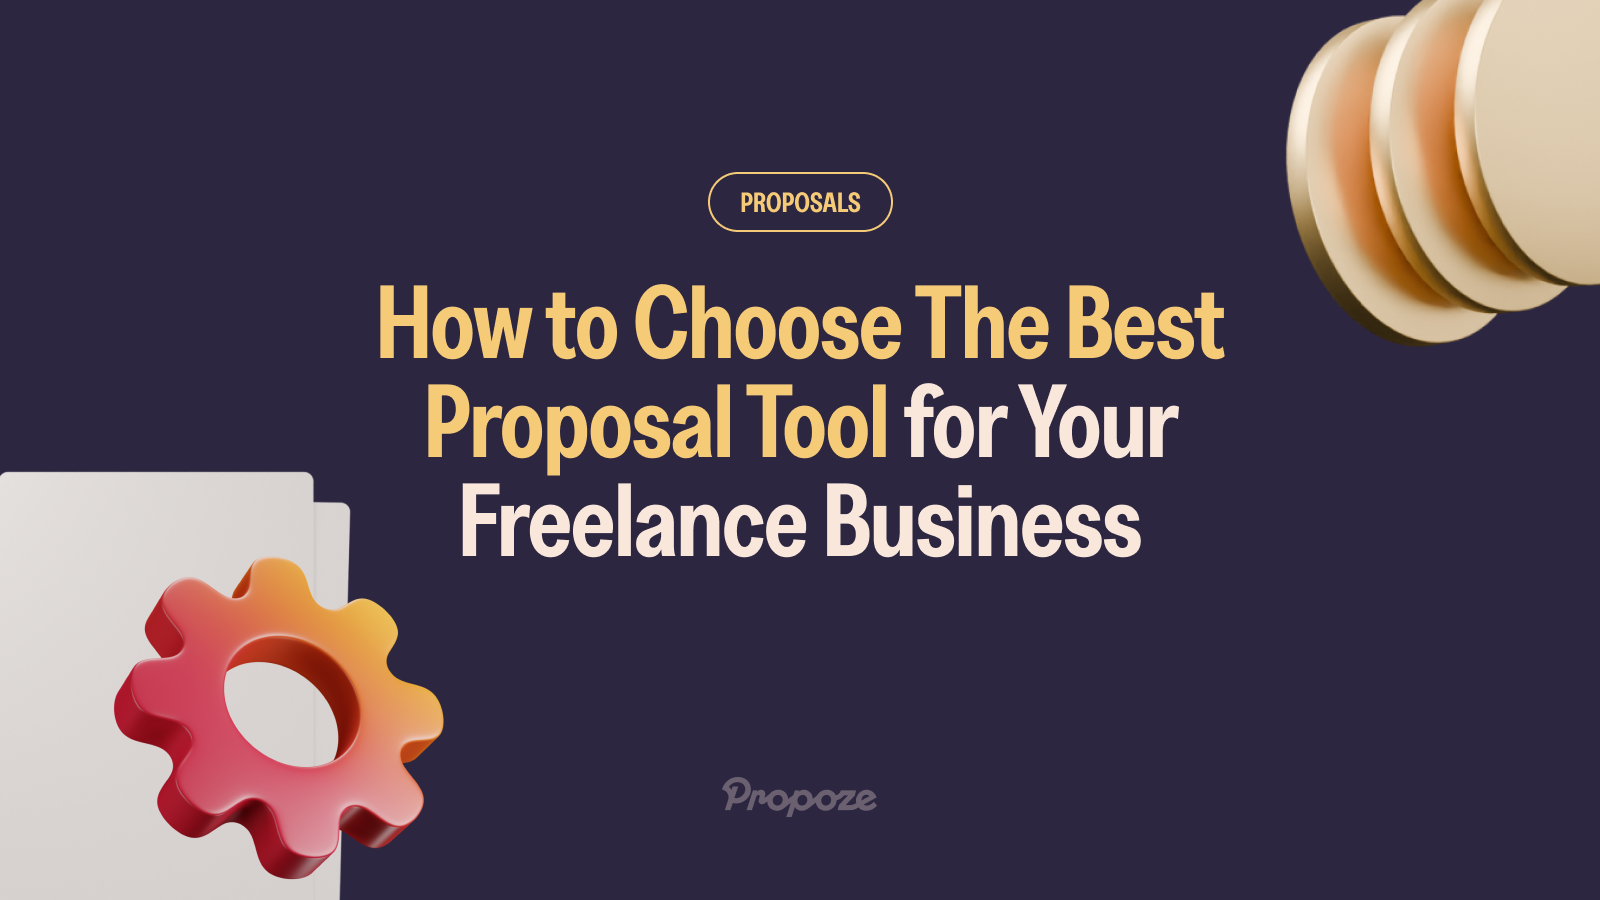 How to Choose The Best Proposal Tool for Your Freelance Business